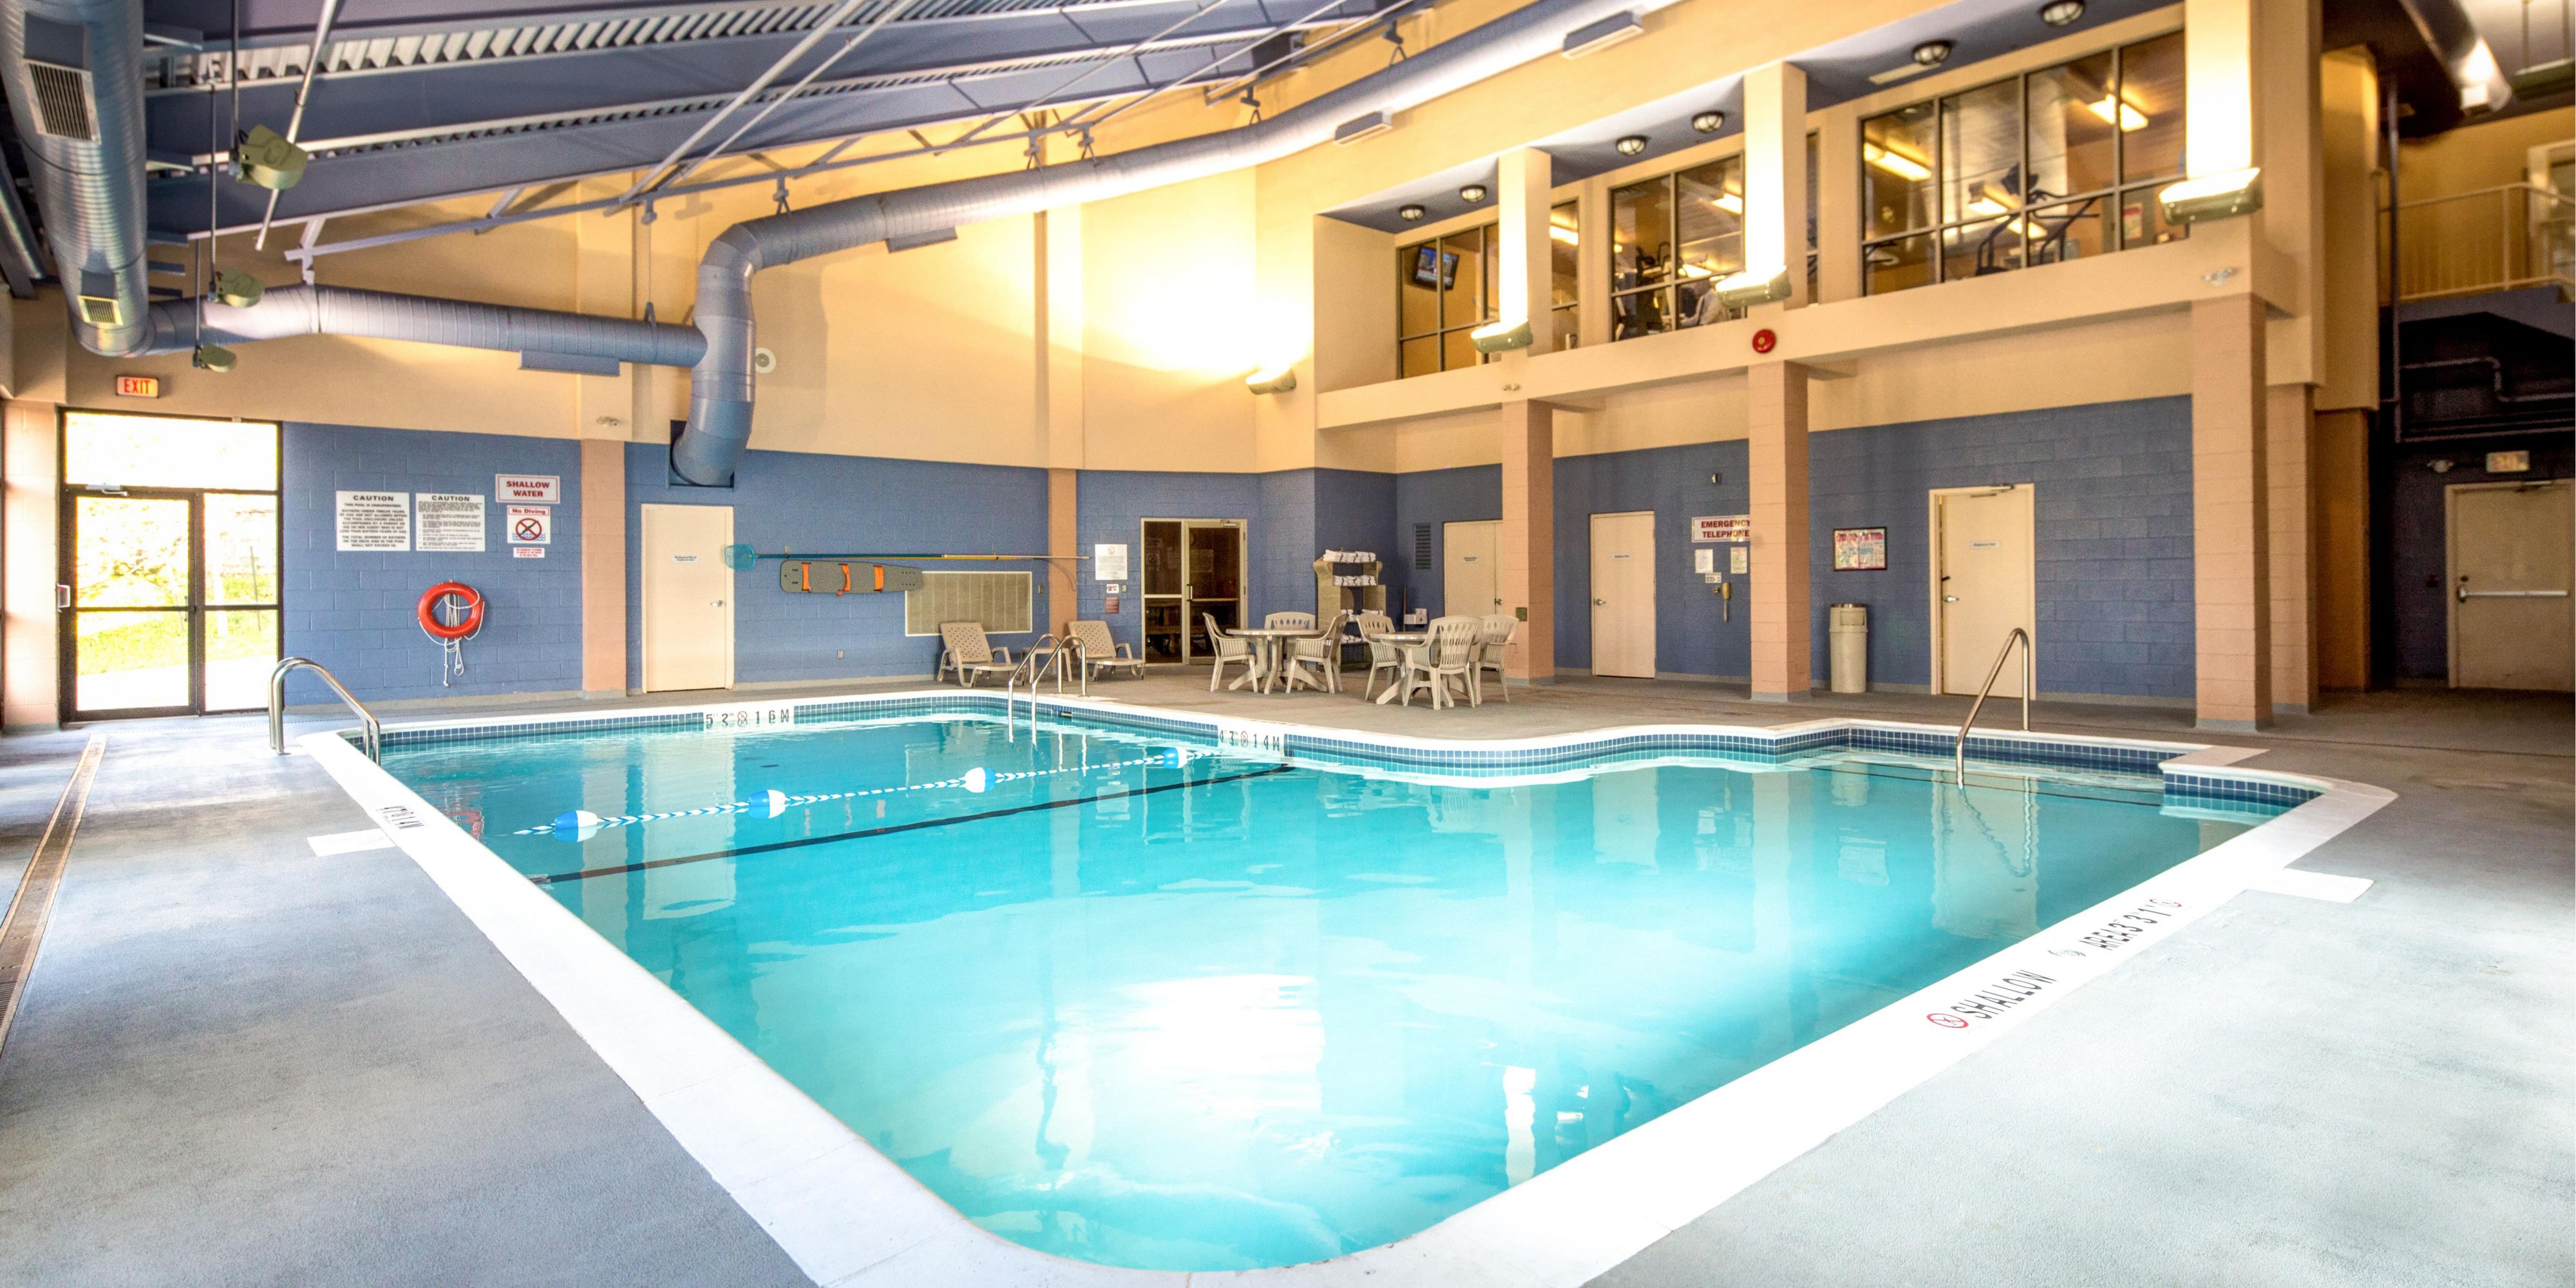 Whatever your fitness goals, our fitness center is equipped with everything you need to maintain your health goals while you stay. Splish Splash the Pool is BACK! Don't forget to take some time to relax and rejuvenate at the pool.